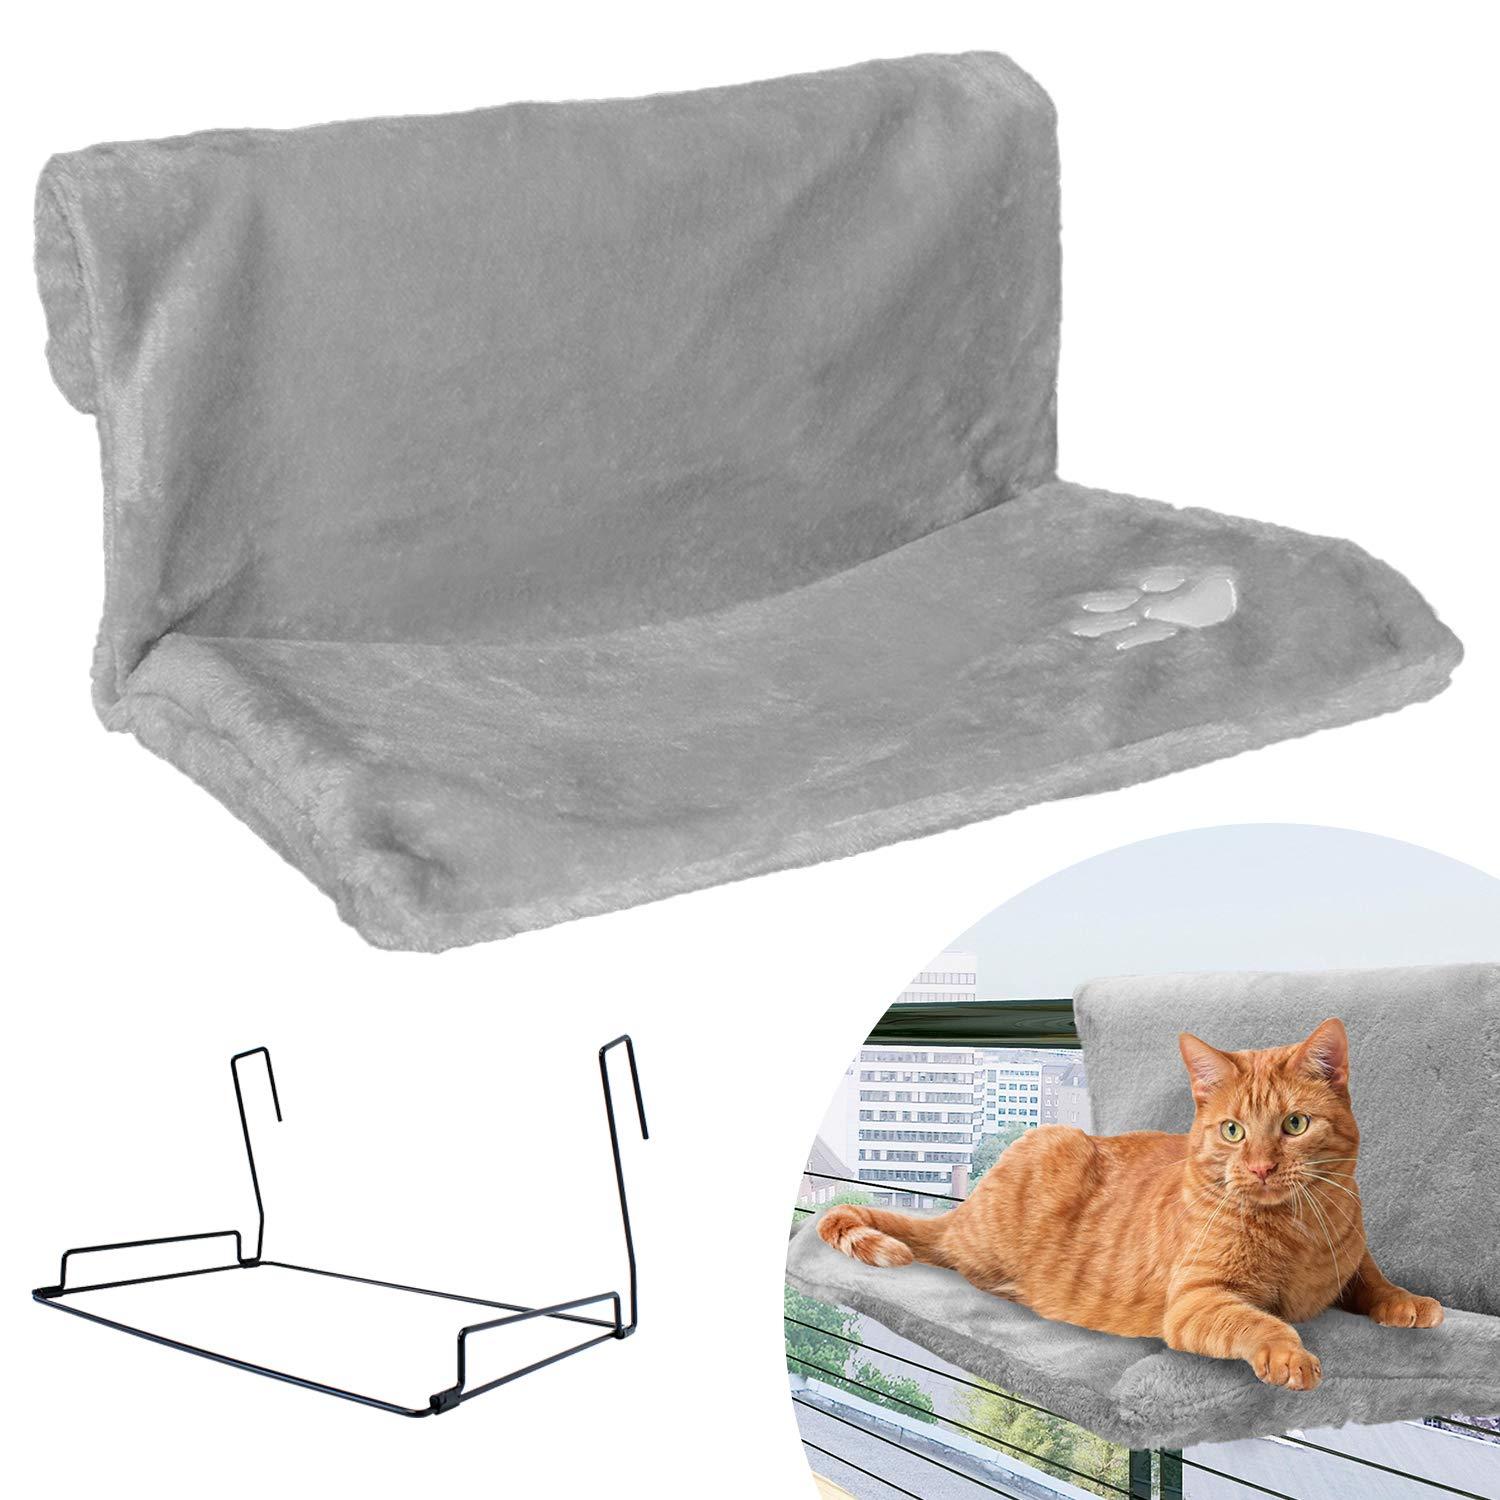 Downtown Pet Supply Cat Hammock Bed - Cat Shelf - Warm and Cozy Plush Nap Mat with Wire Bed Frame - Strong & Secure - Grey - 18.5 in x 12 in